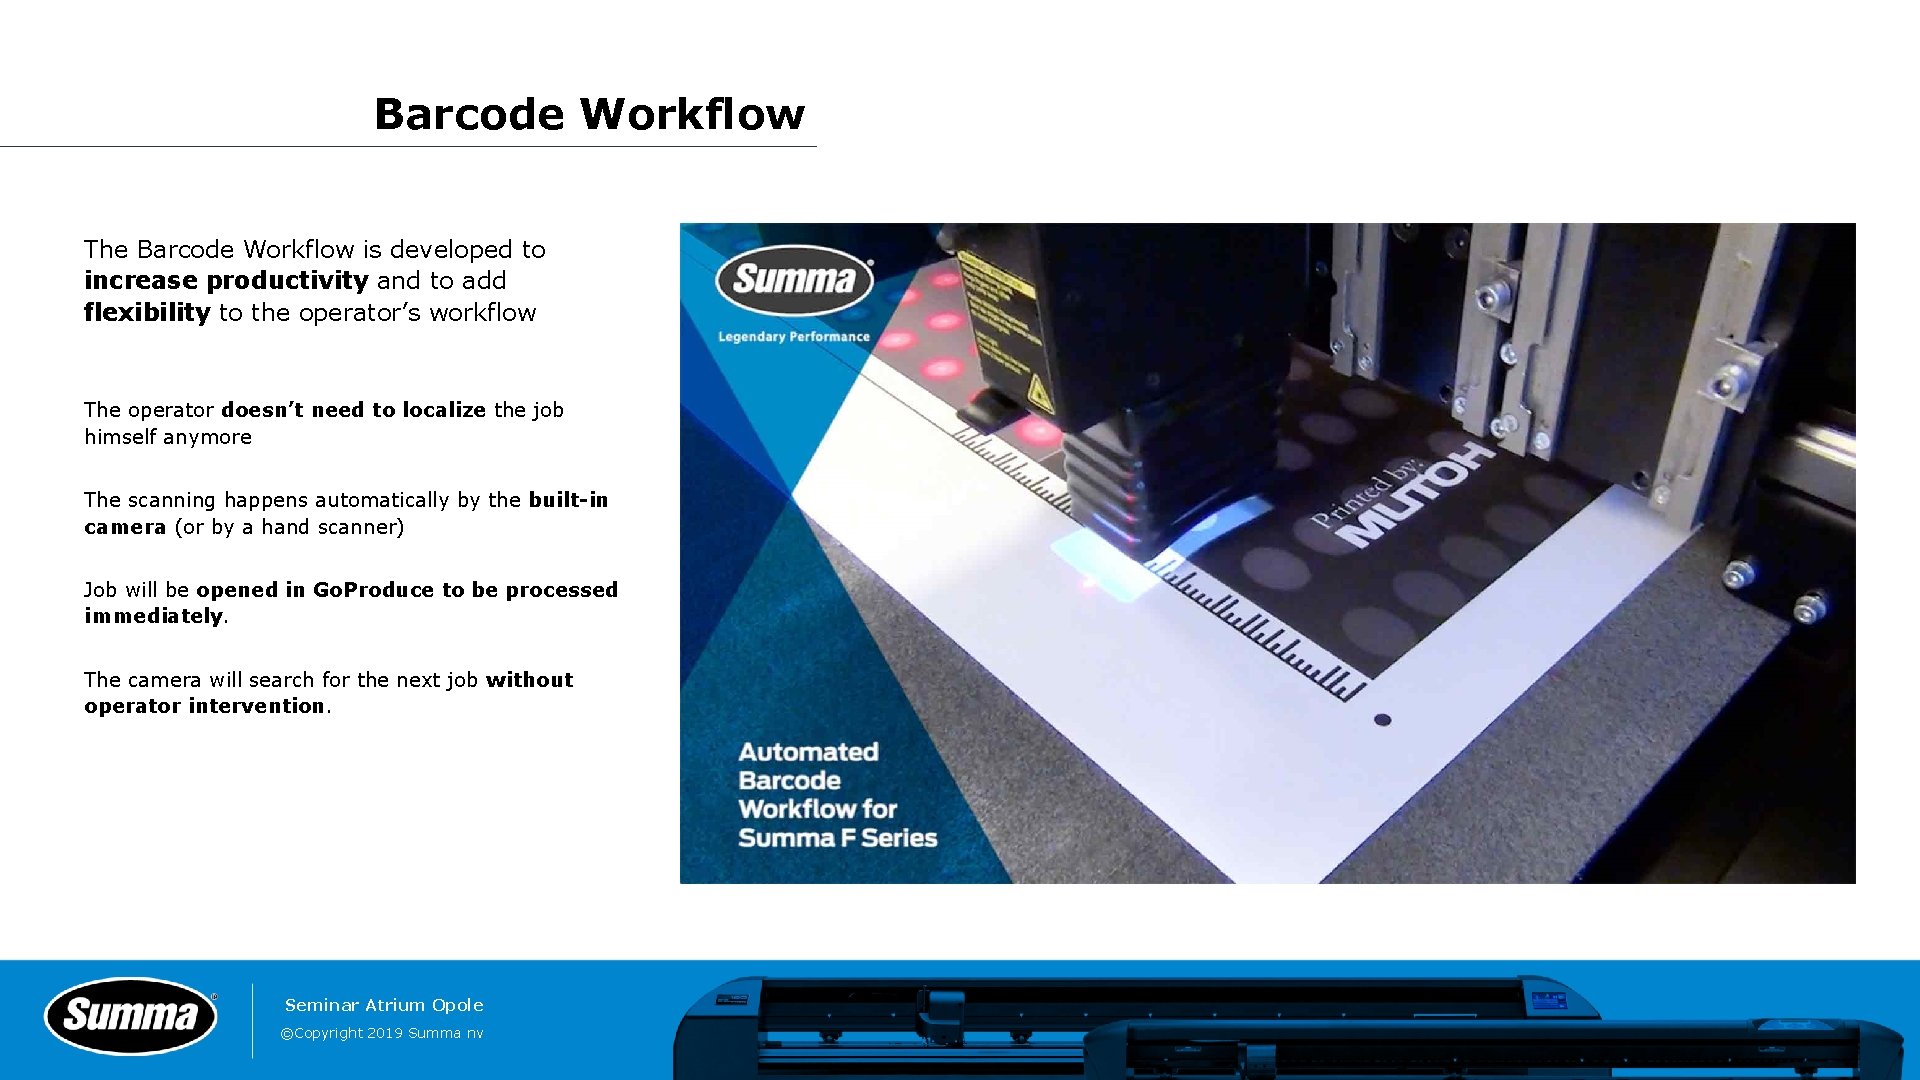 Barcode Workflow The Barcode Workflow is developed to increase productivity and to add flexibility